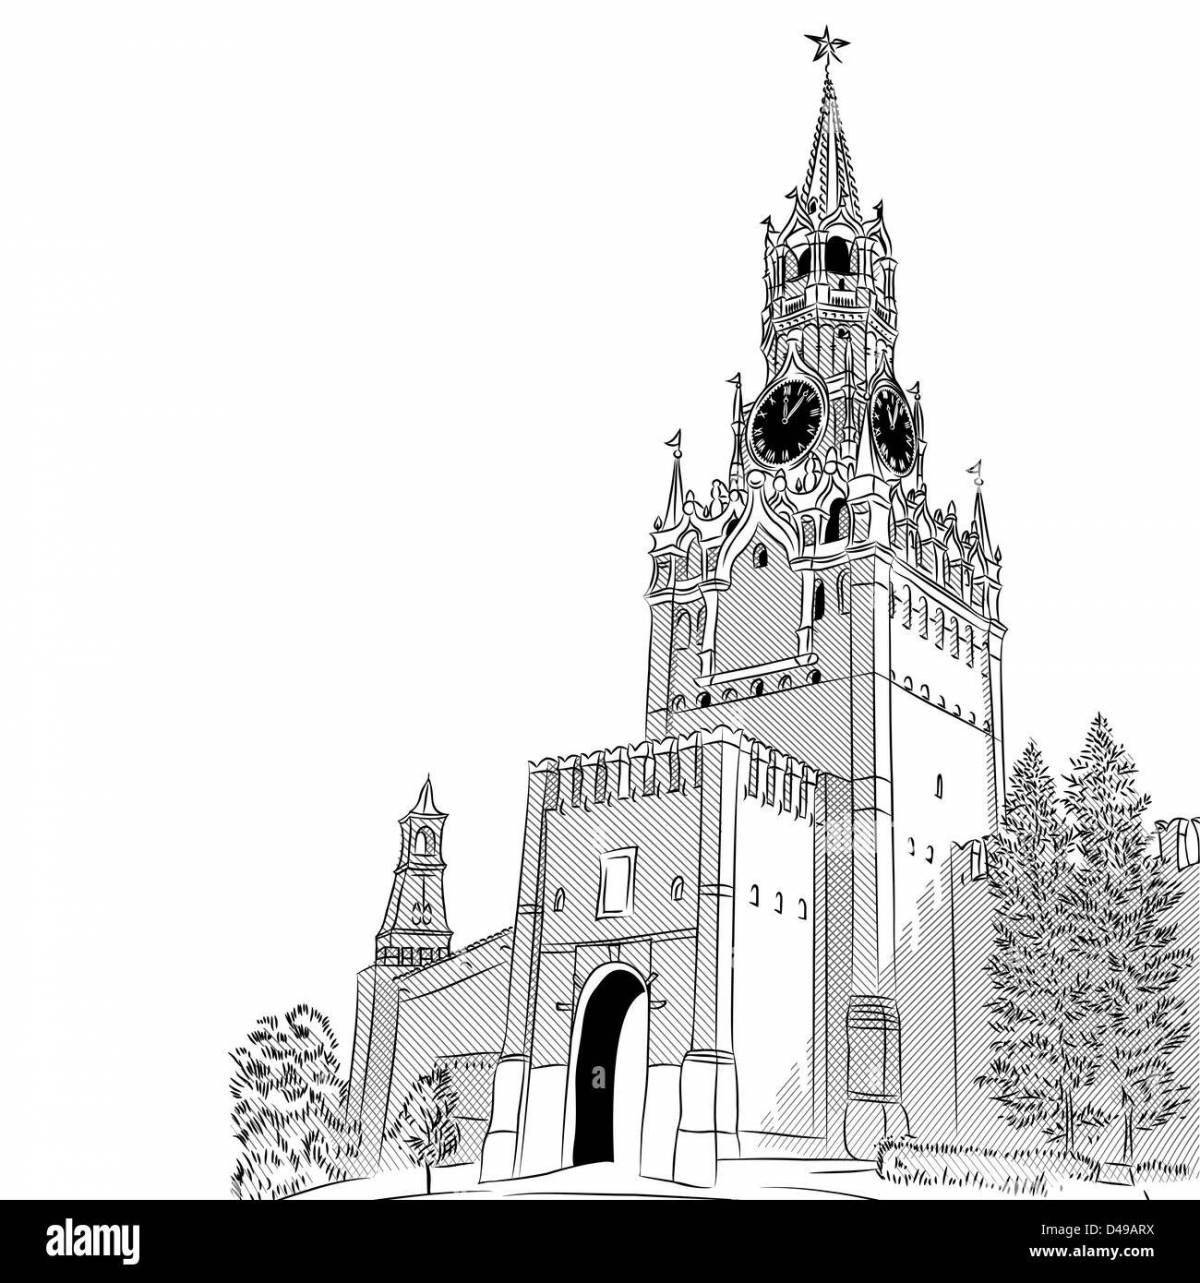 Exquisite Kremlin tower coloring page